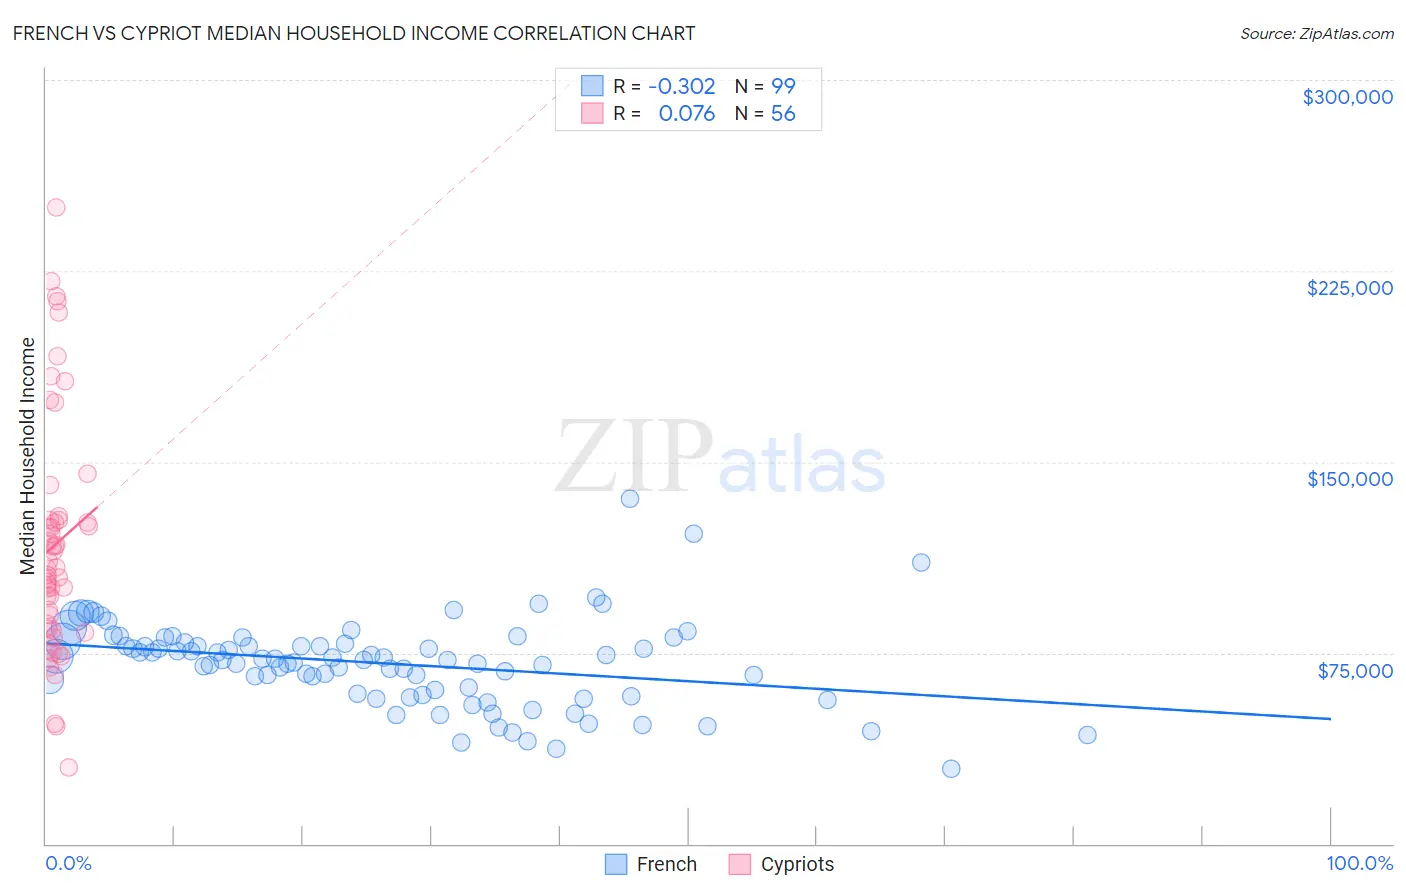 French vs Cypriot Median Household Income